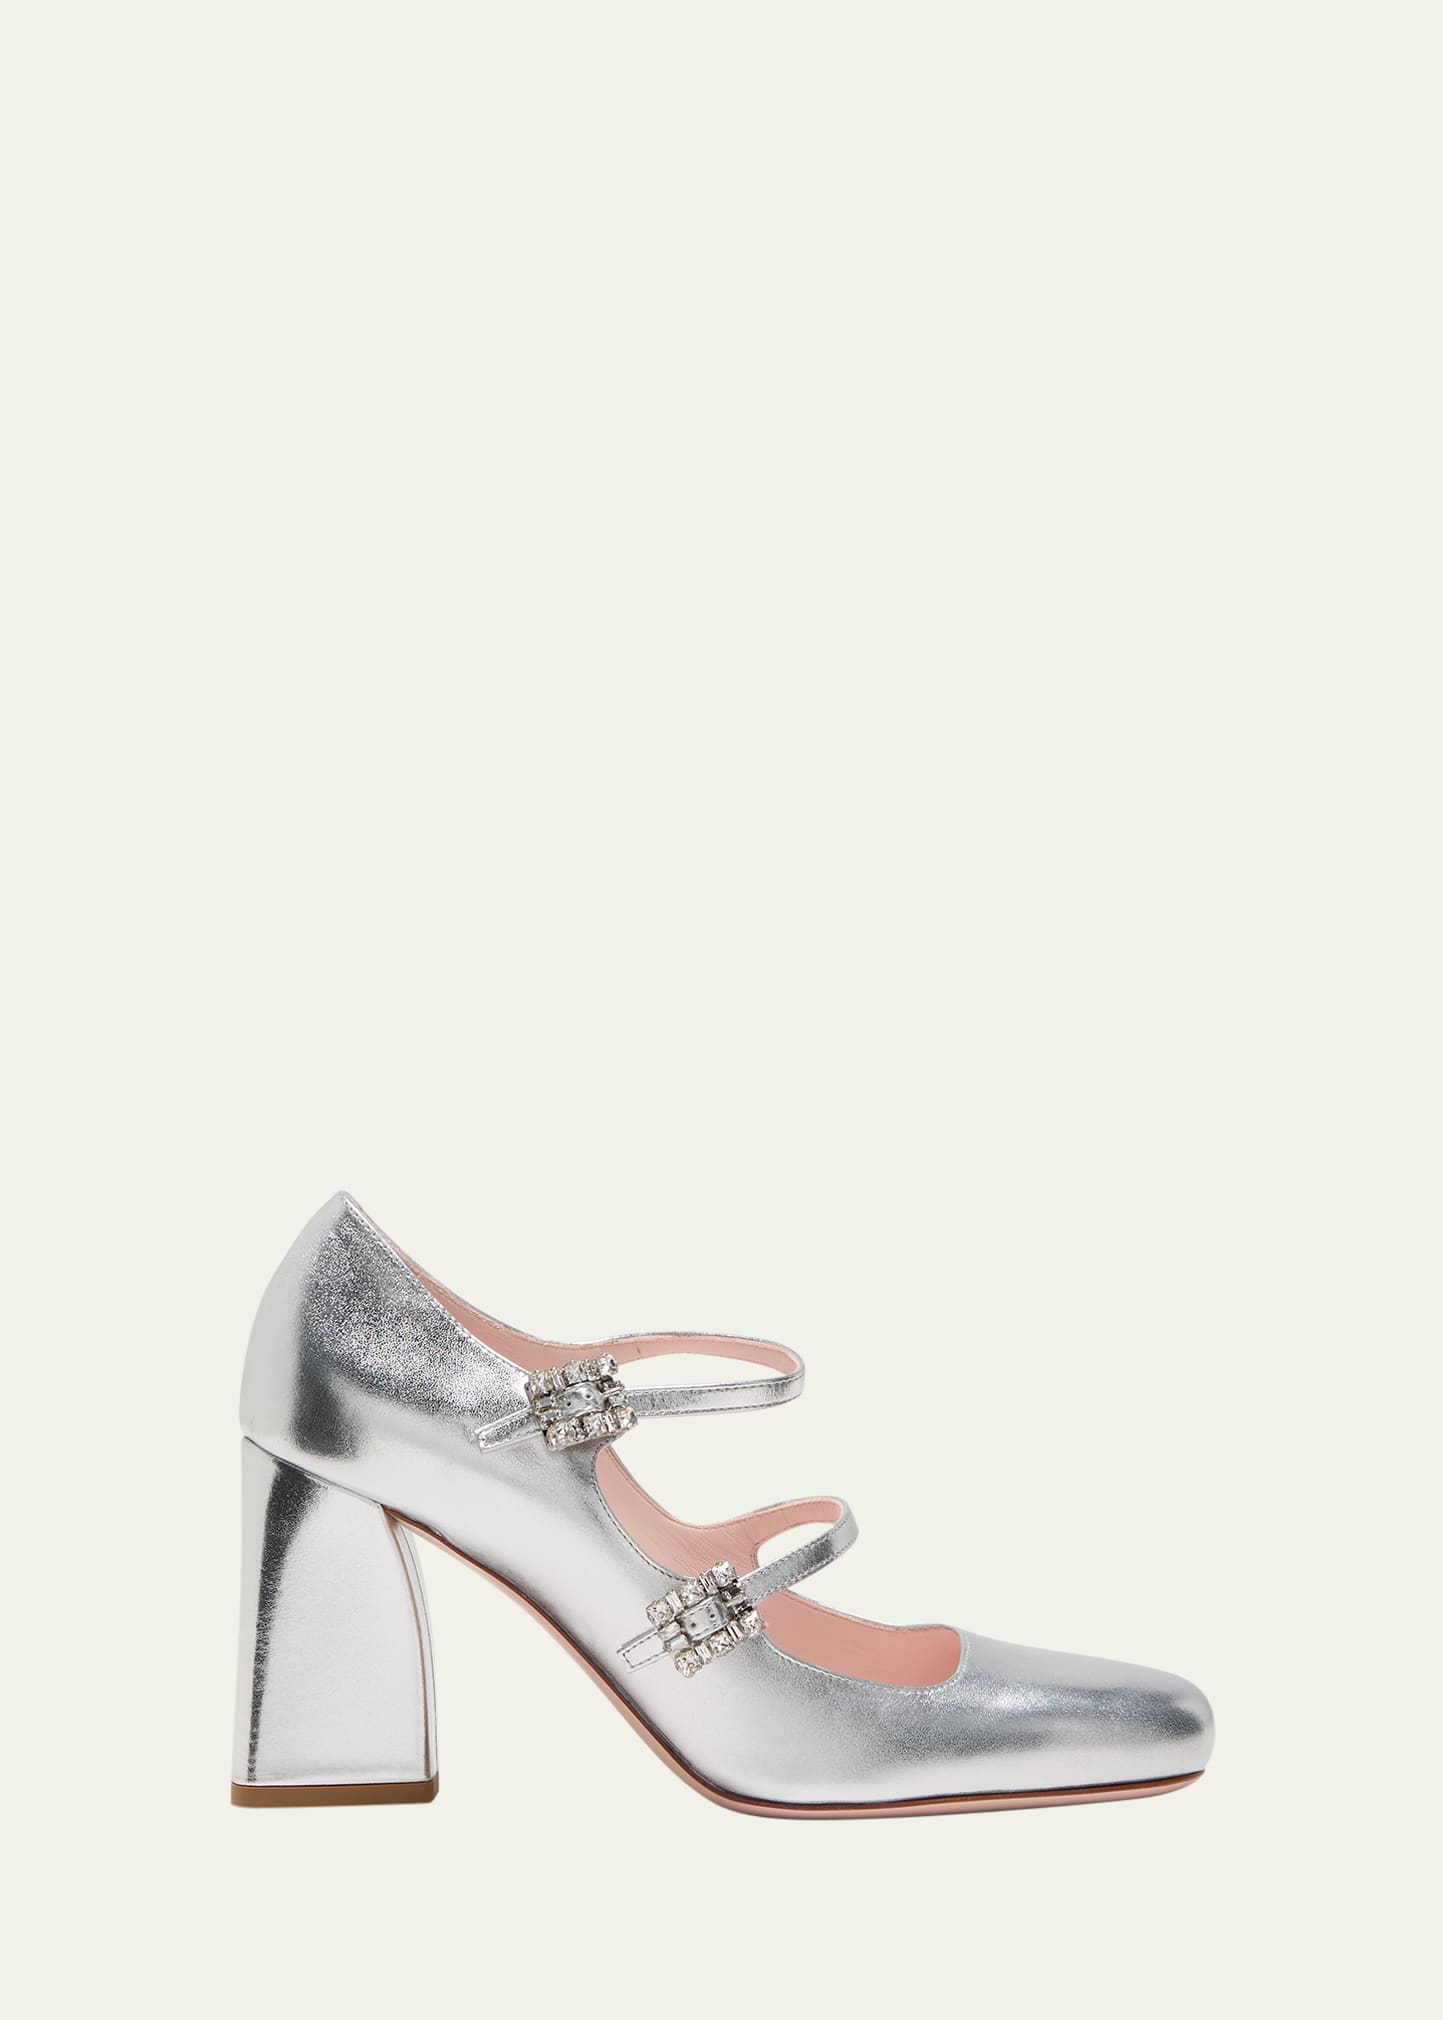 Roger Vivier Metallic Dual Mary Jane Pumps In Argento